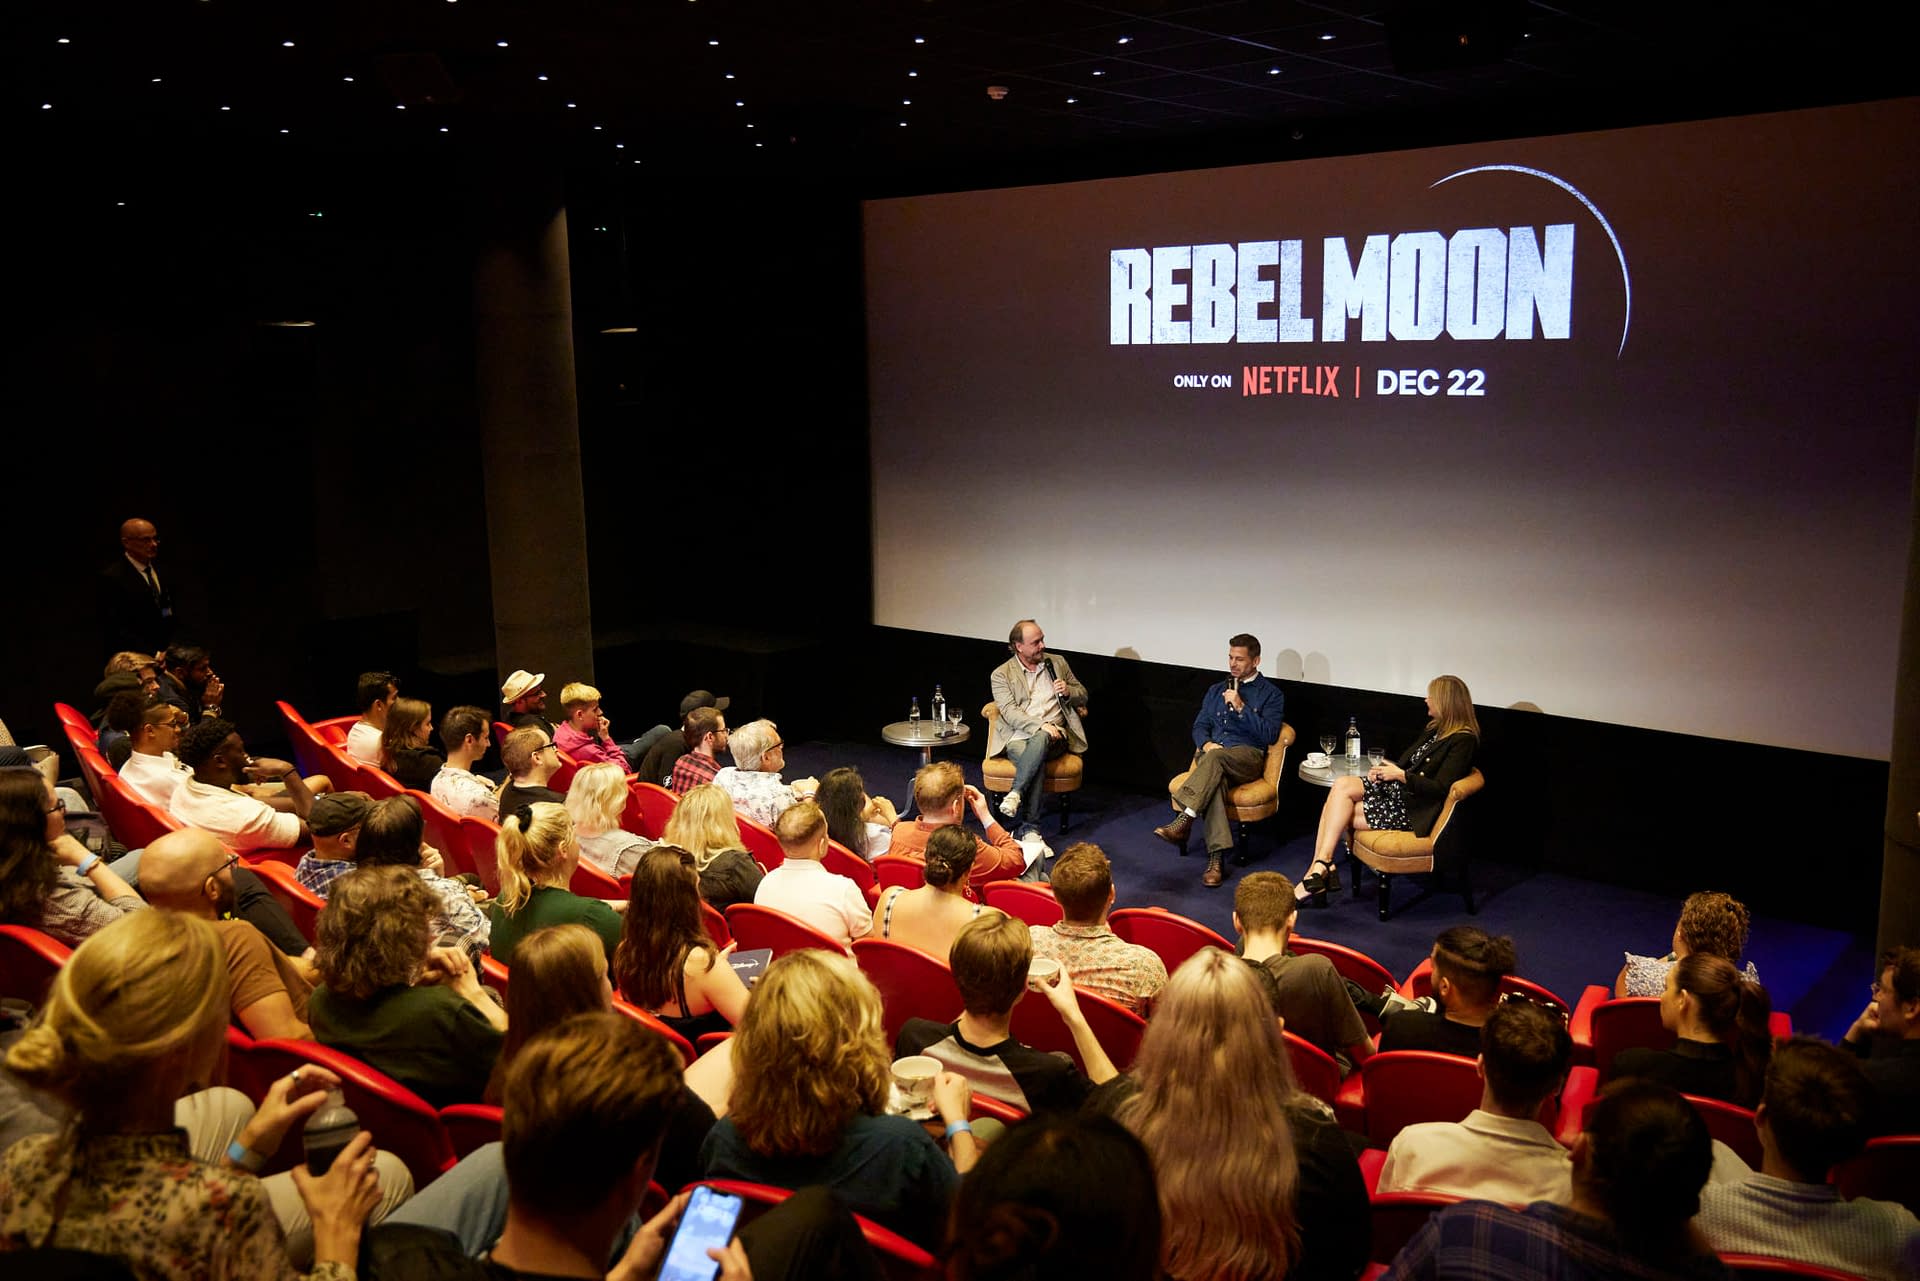 Watch the trailer for Zack Snyder's Rebel Moon